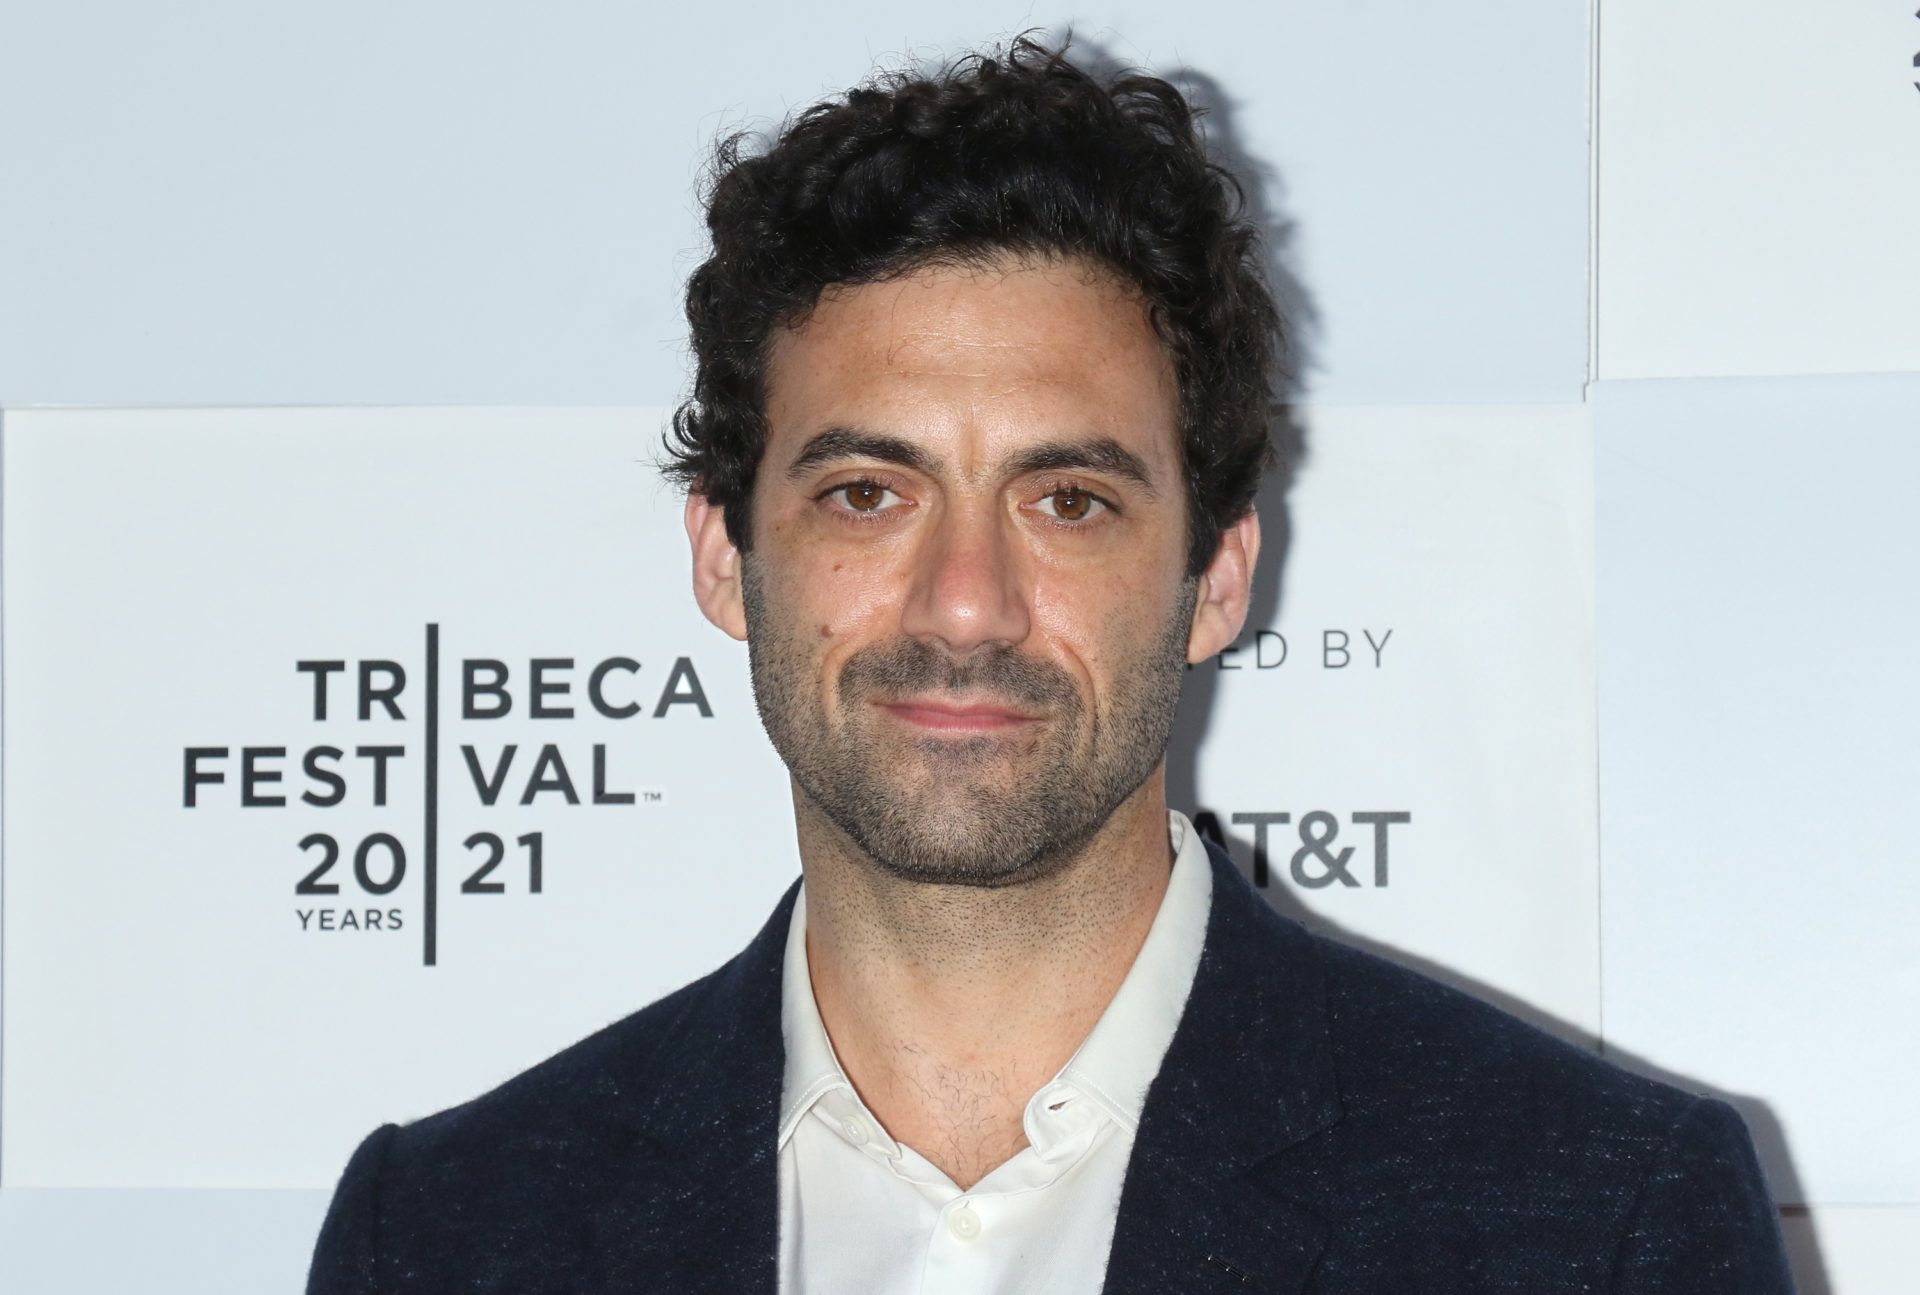 "With/In Vol.1" - 2021 Tribeca Festival